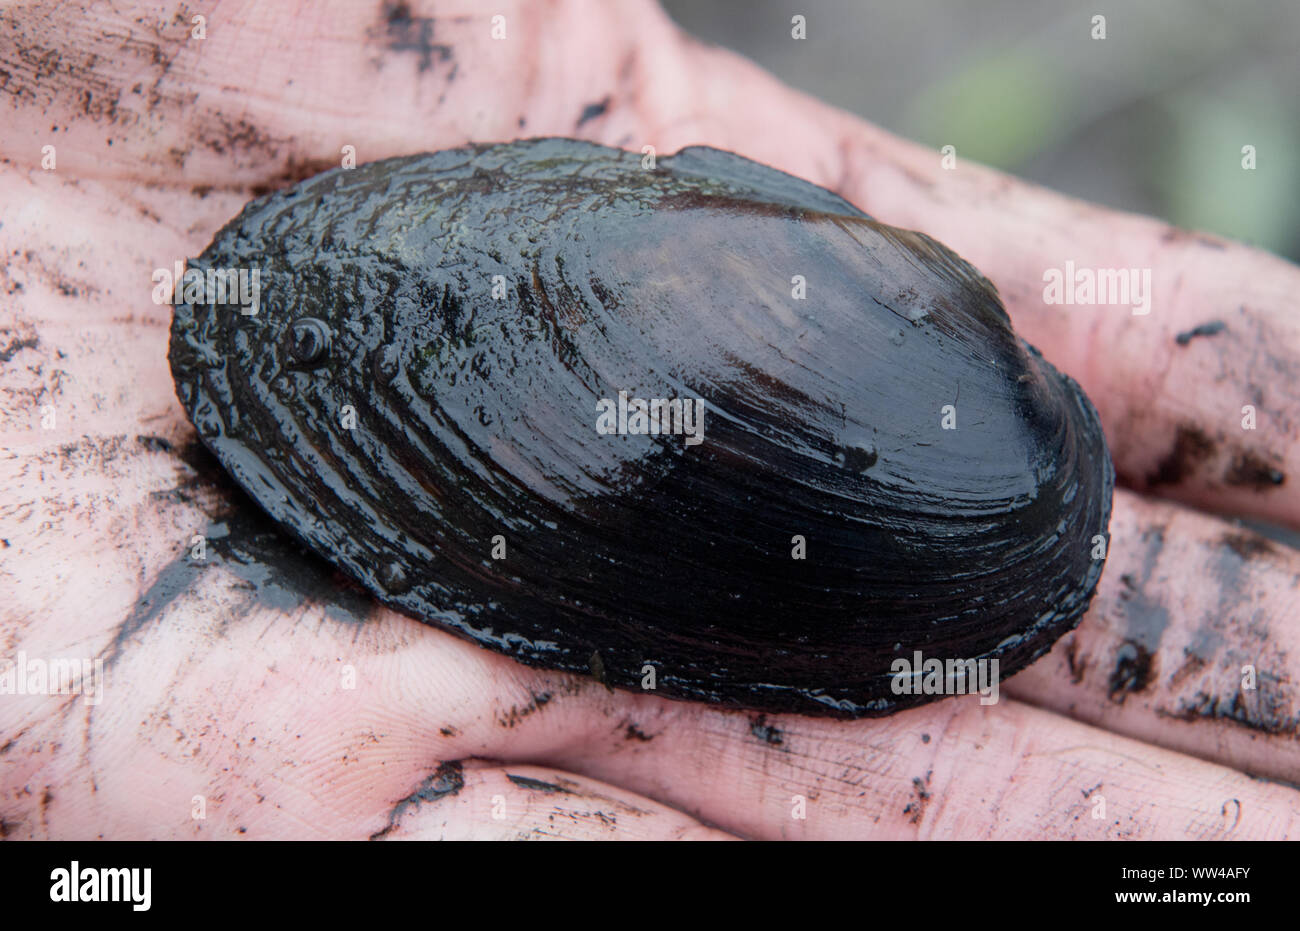 12 September 2019, Mecklenburg-Western Pomerania, Löbnitz: A river mussel lies on one hand. An unusually large occurrence of the endangered river mussel has been discovered in the small river Barthe in the district of Vorpommern-Rügen. The shellfish were found during renaturation work and must be implemented, as the Lower Nature Conservation Authority of the district announced. In many regions it is already extinct. The company is listed nationwide in the Red List as 'threatened with extinction'. The EU has included the river mussel (Unio crassus) as a specially protected species in the Flora- Stock Photo